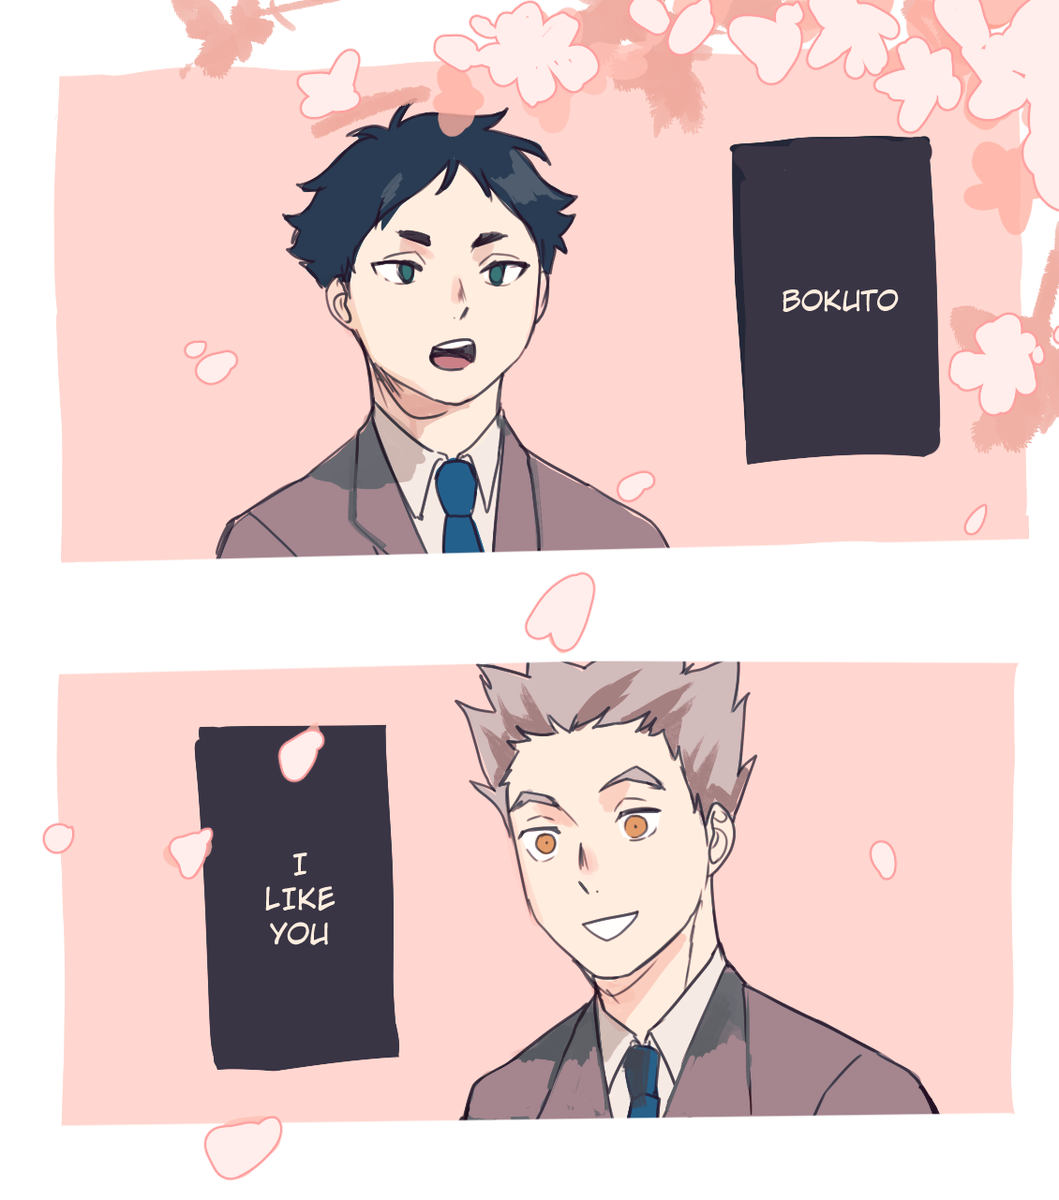 #bokuakaweek day 1: Confessions (Akaashi waited for 7 min to hear Bokuto's reply) 